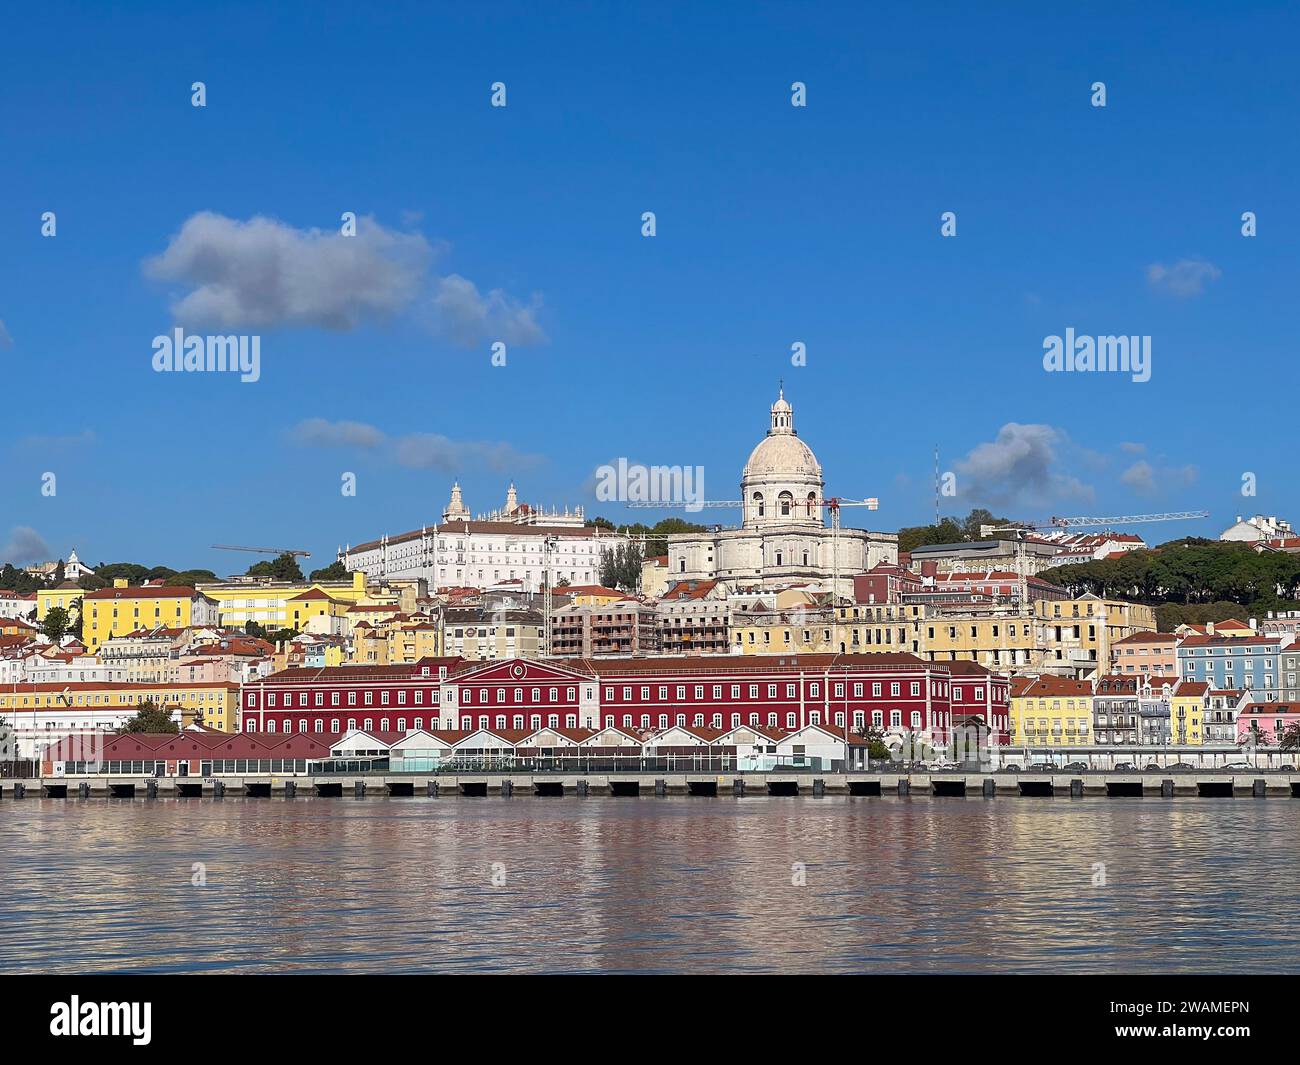 Lisbon riverfront seen from Tagus River Stock Photo